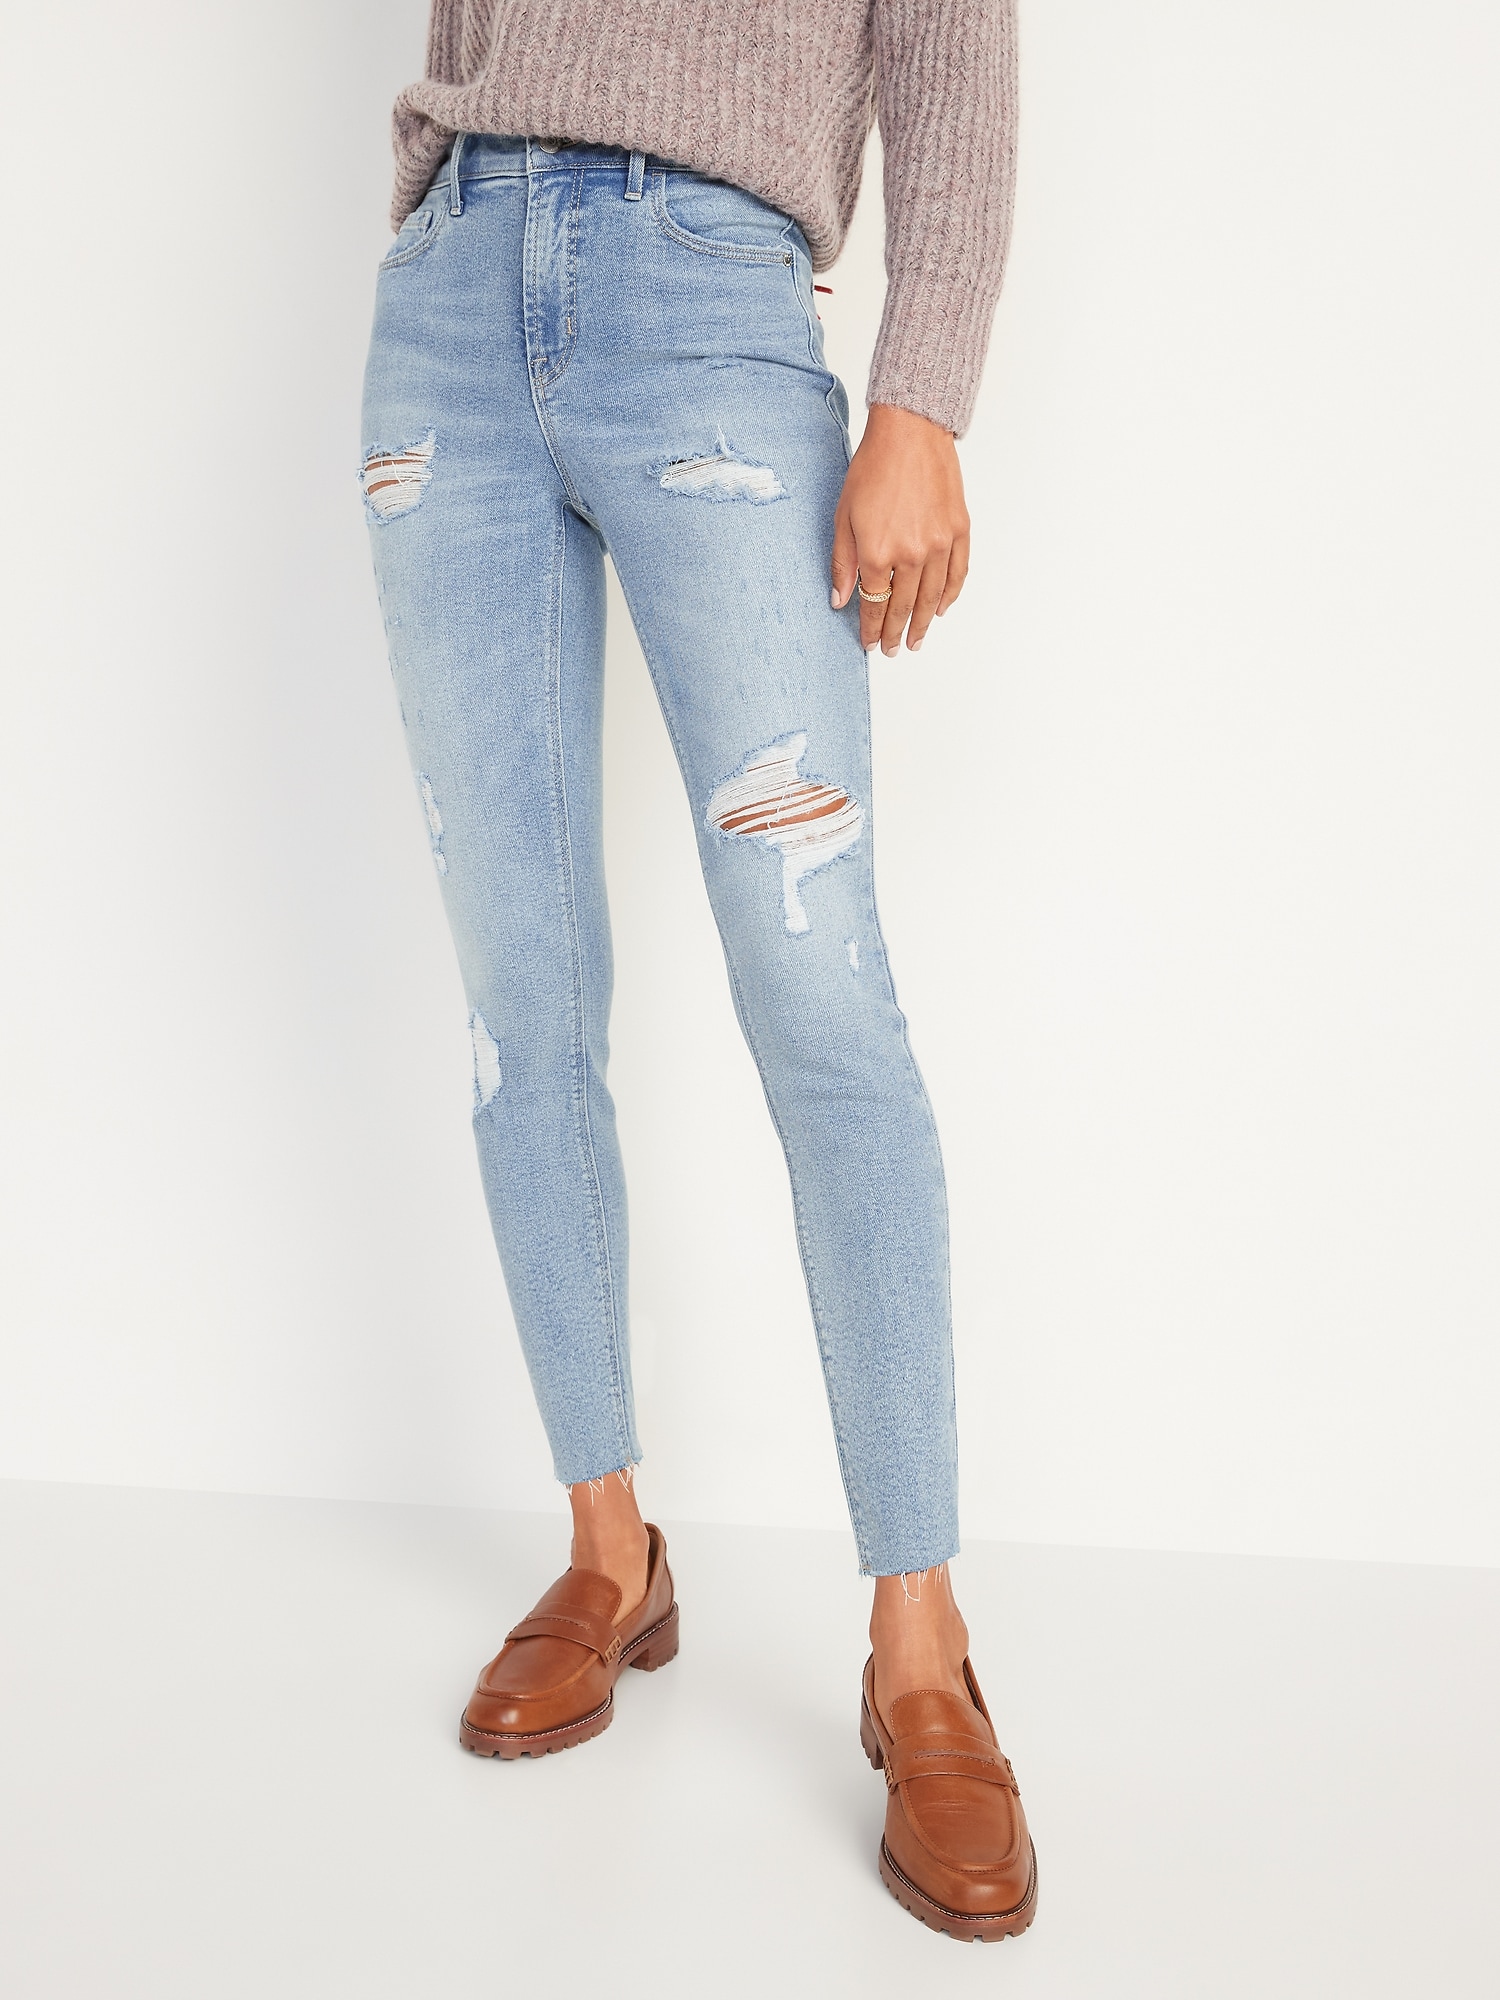 High Waisted Rockstar Super Skinny Ripped Cut Off Jeans For Women Old